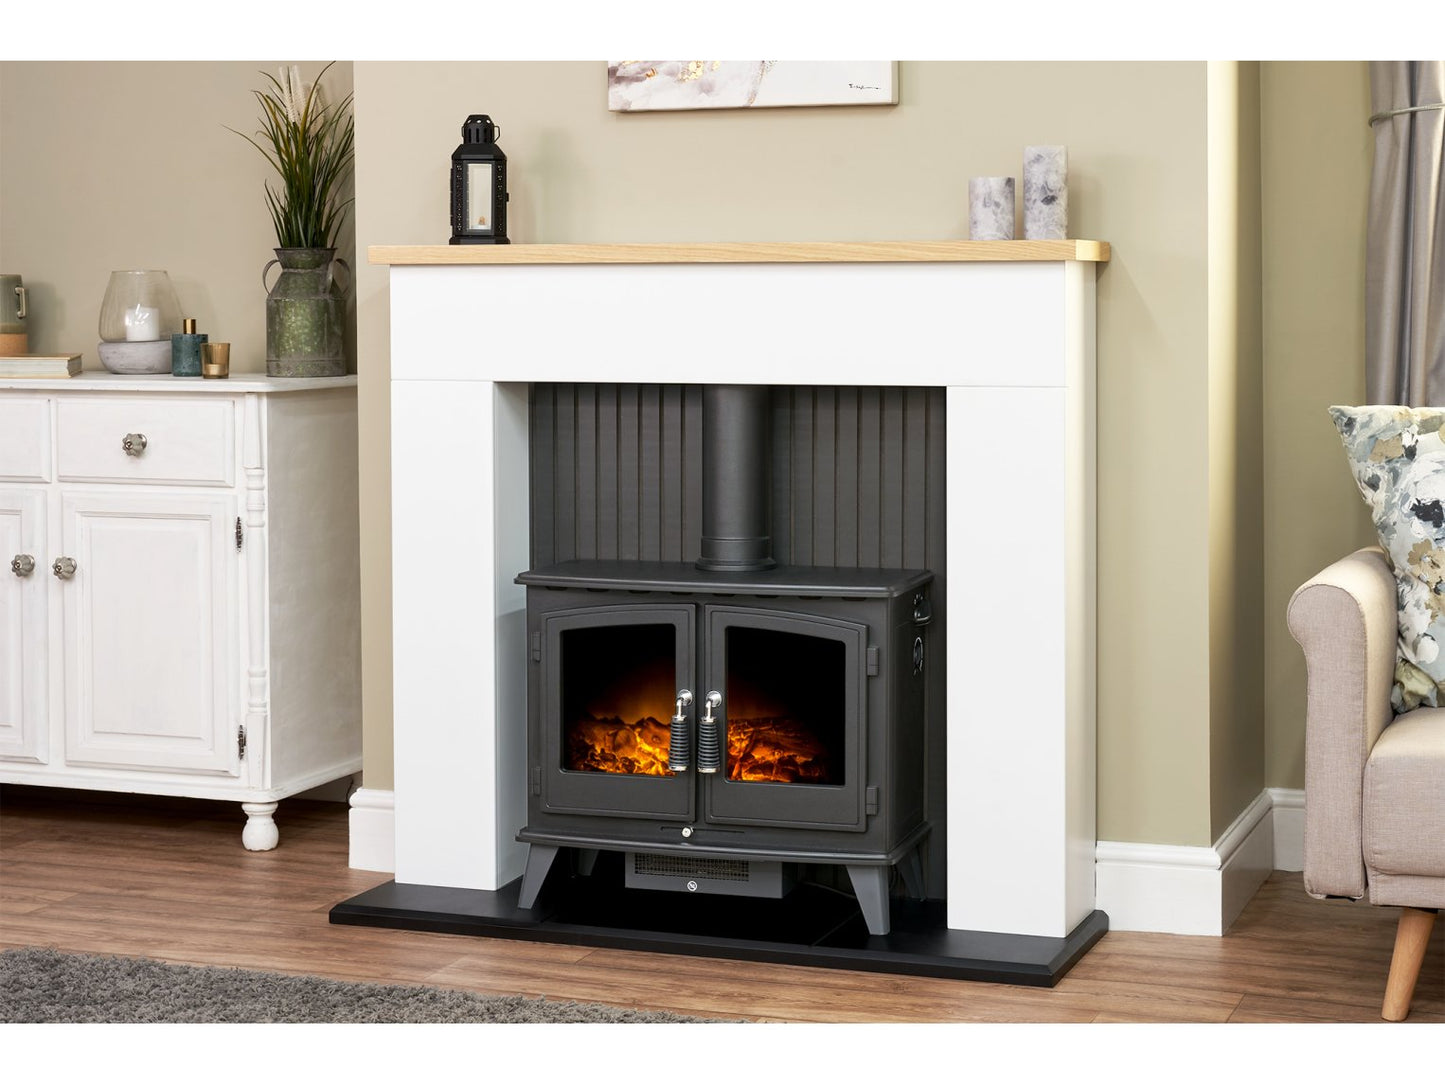 Adam Innsbruck Stove Fireplace Pure White + Woodhouse Electric Stove Black, 48"